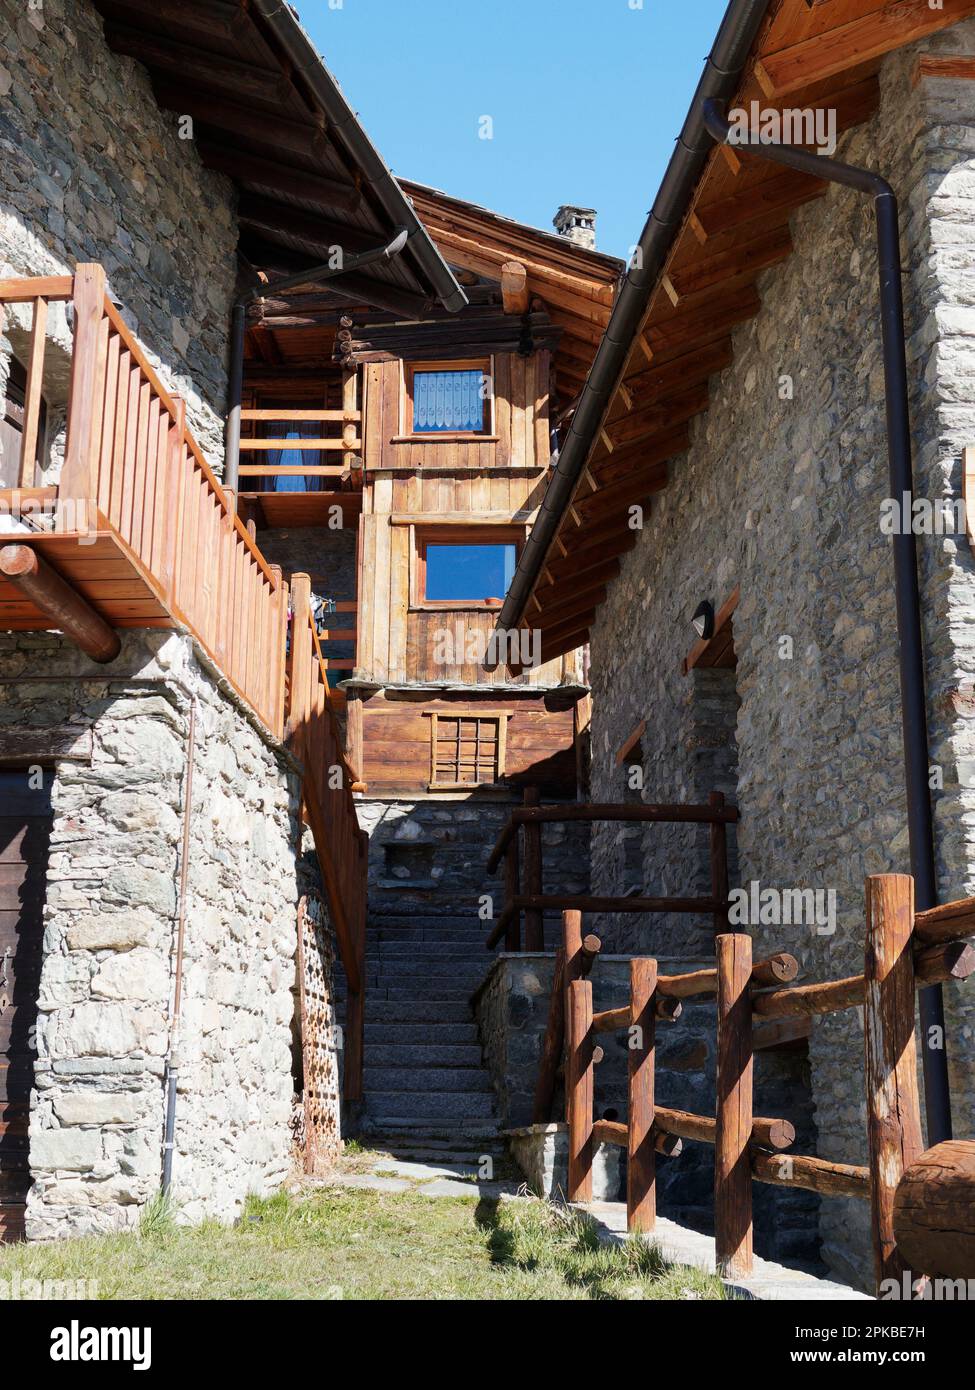 Wooden and stone built houses in the village of Chamois in the Aosta Valley Italy Stock Photo